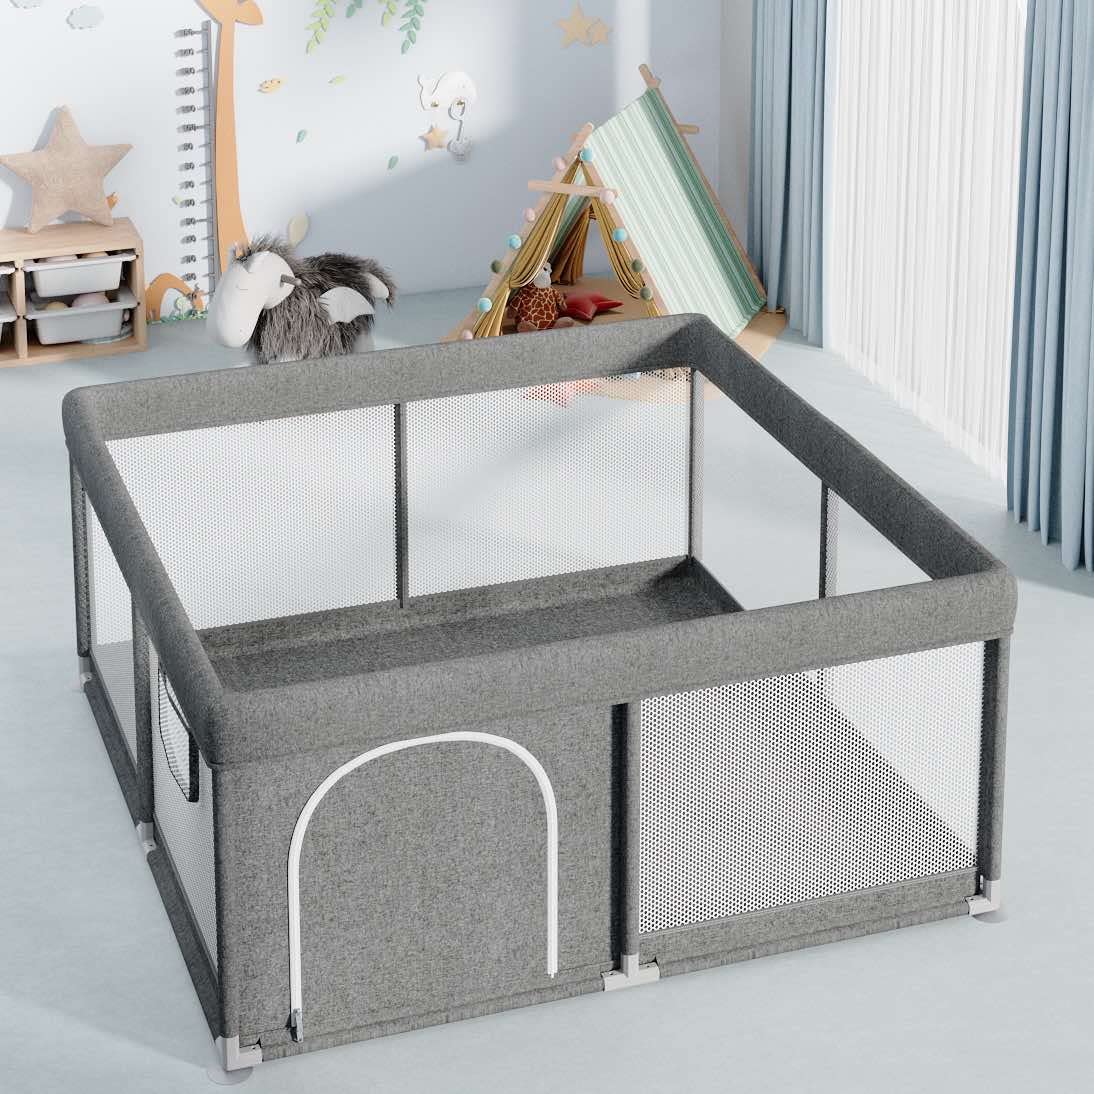 UANLAUO Baby Playpen, Safety Play Pens for Babies and Toddlers, Baby Play Yards with Breathable Mesh, Easy to Assamable Baby Fence, Sturdy Playyard Play Area for Apartment, 47"x47" Grey
